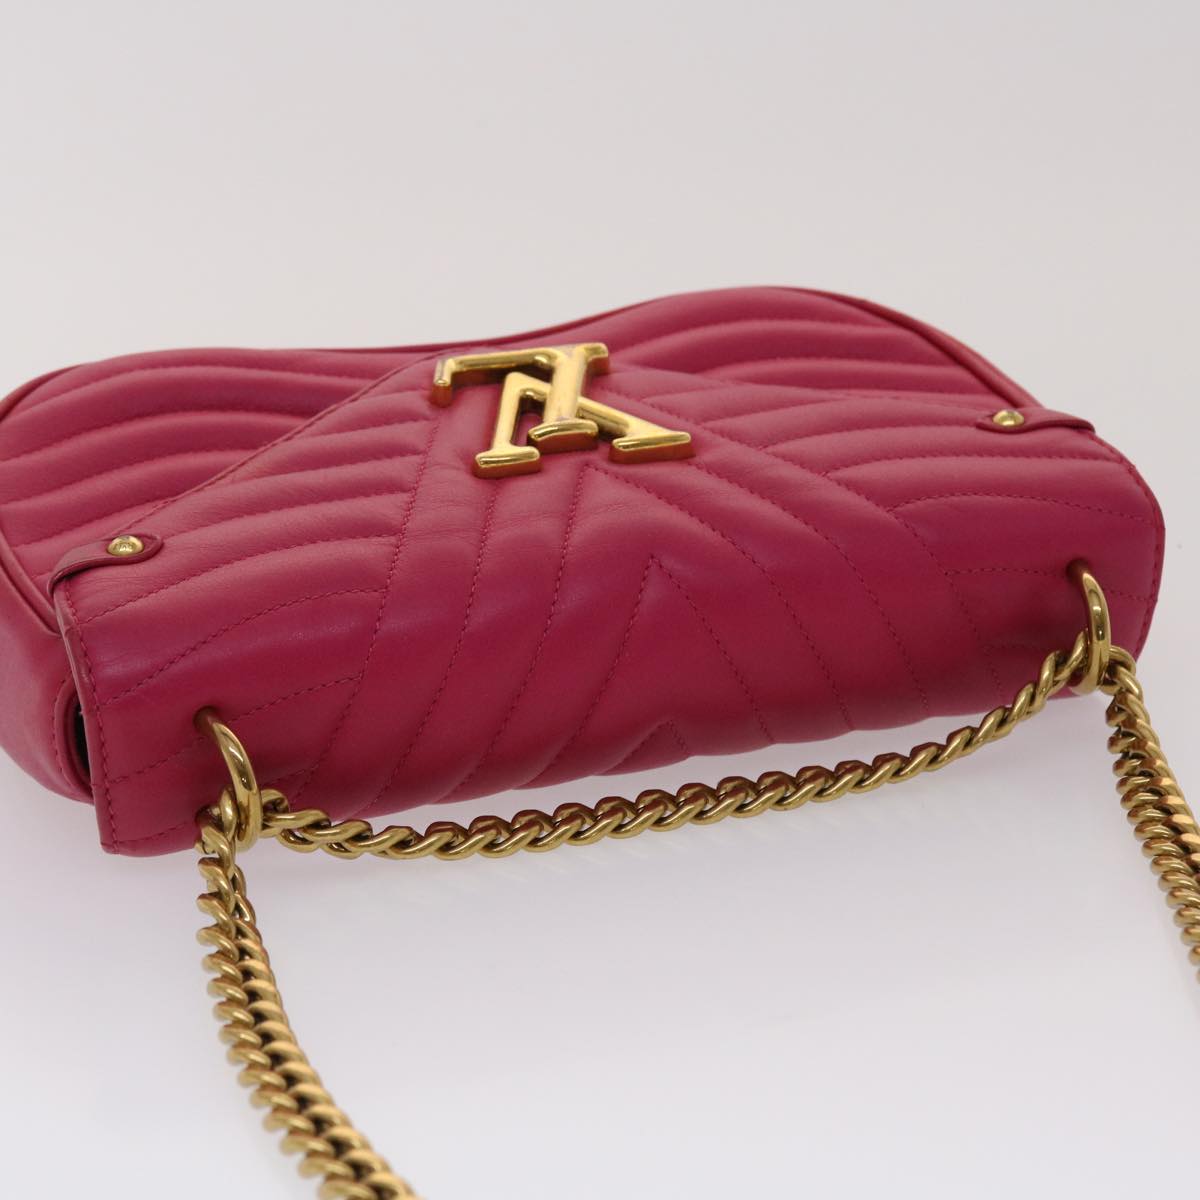 LOUIS VUITTON New Wave MM Chain Shoulder Bag Leather 2Way Pink M55020 Auth 24027